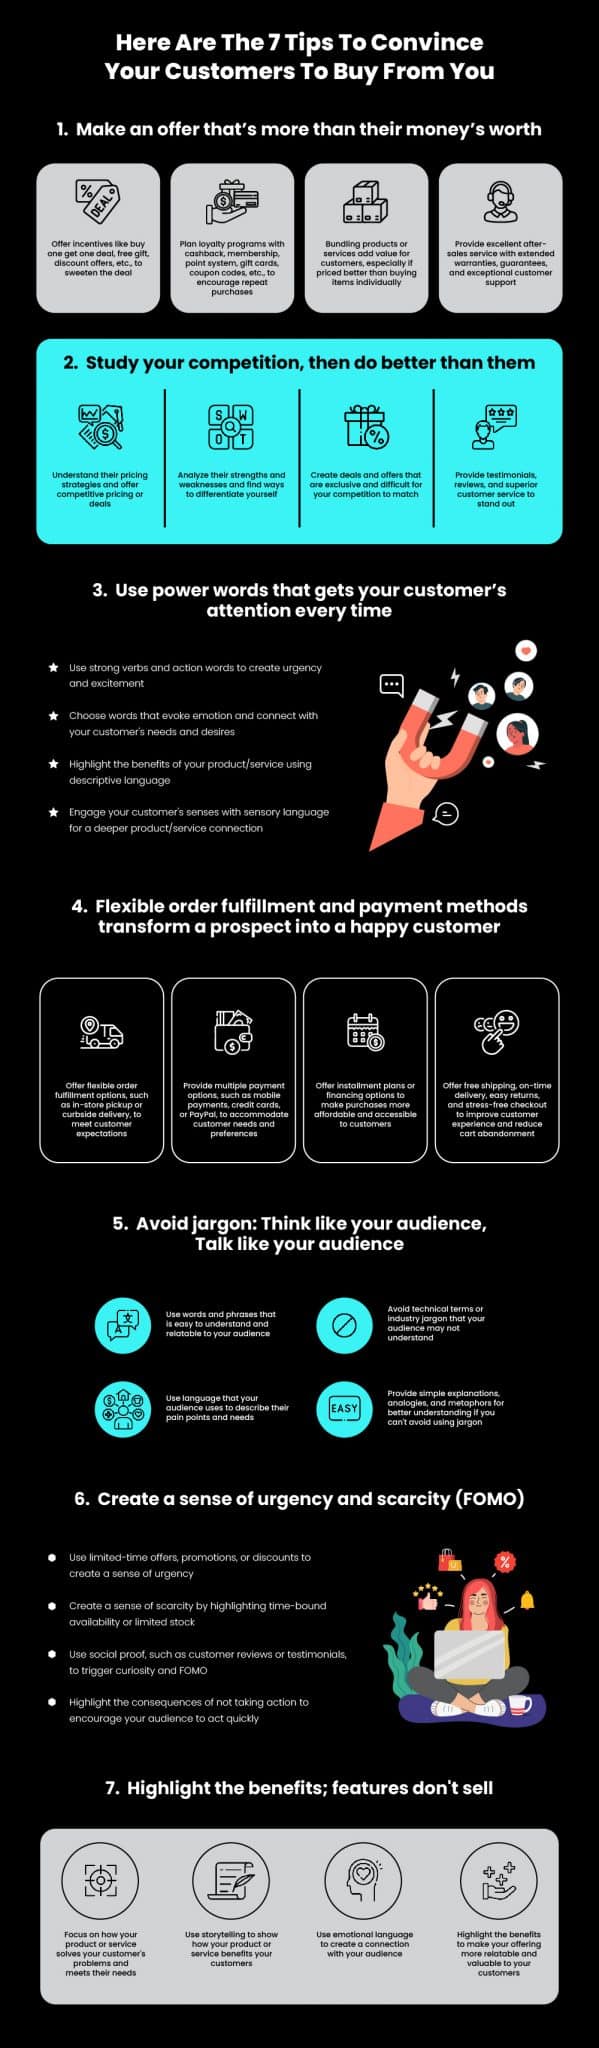 Customer Persuasion Techniques - Tips to Convince Your Customers to Buy From You